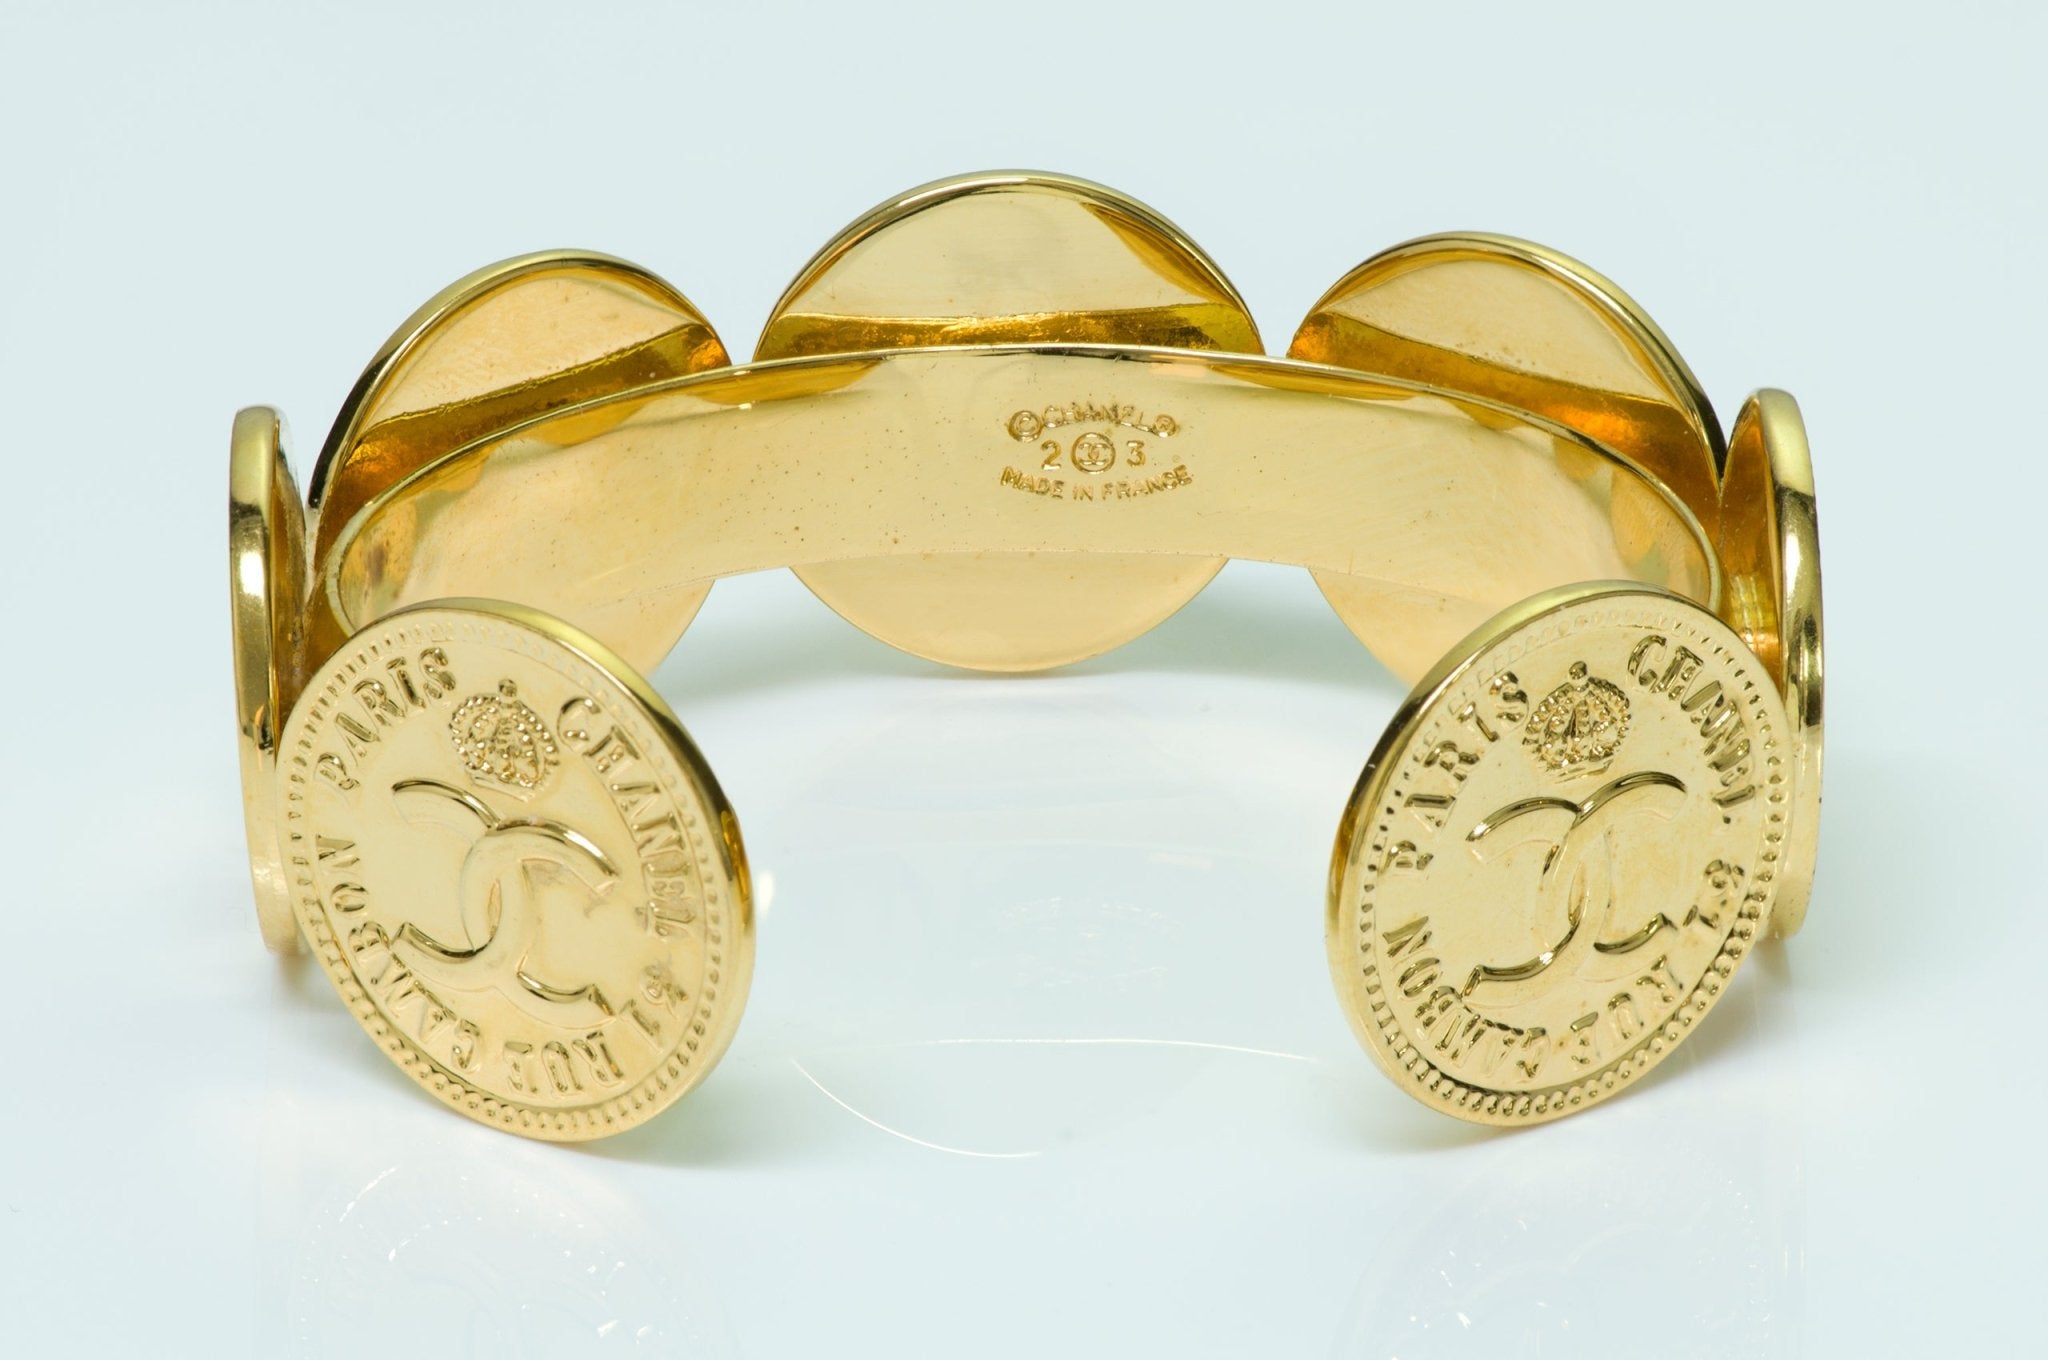 Chanel 1980’s Coco Mademoiselle Coin Cuff Bracelet